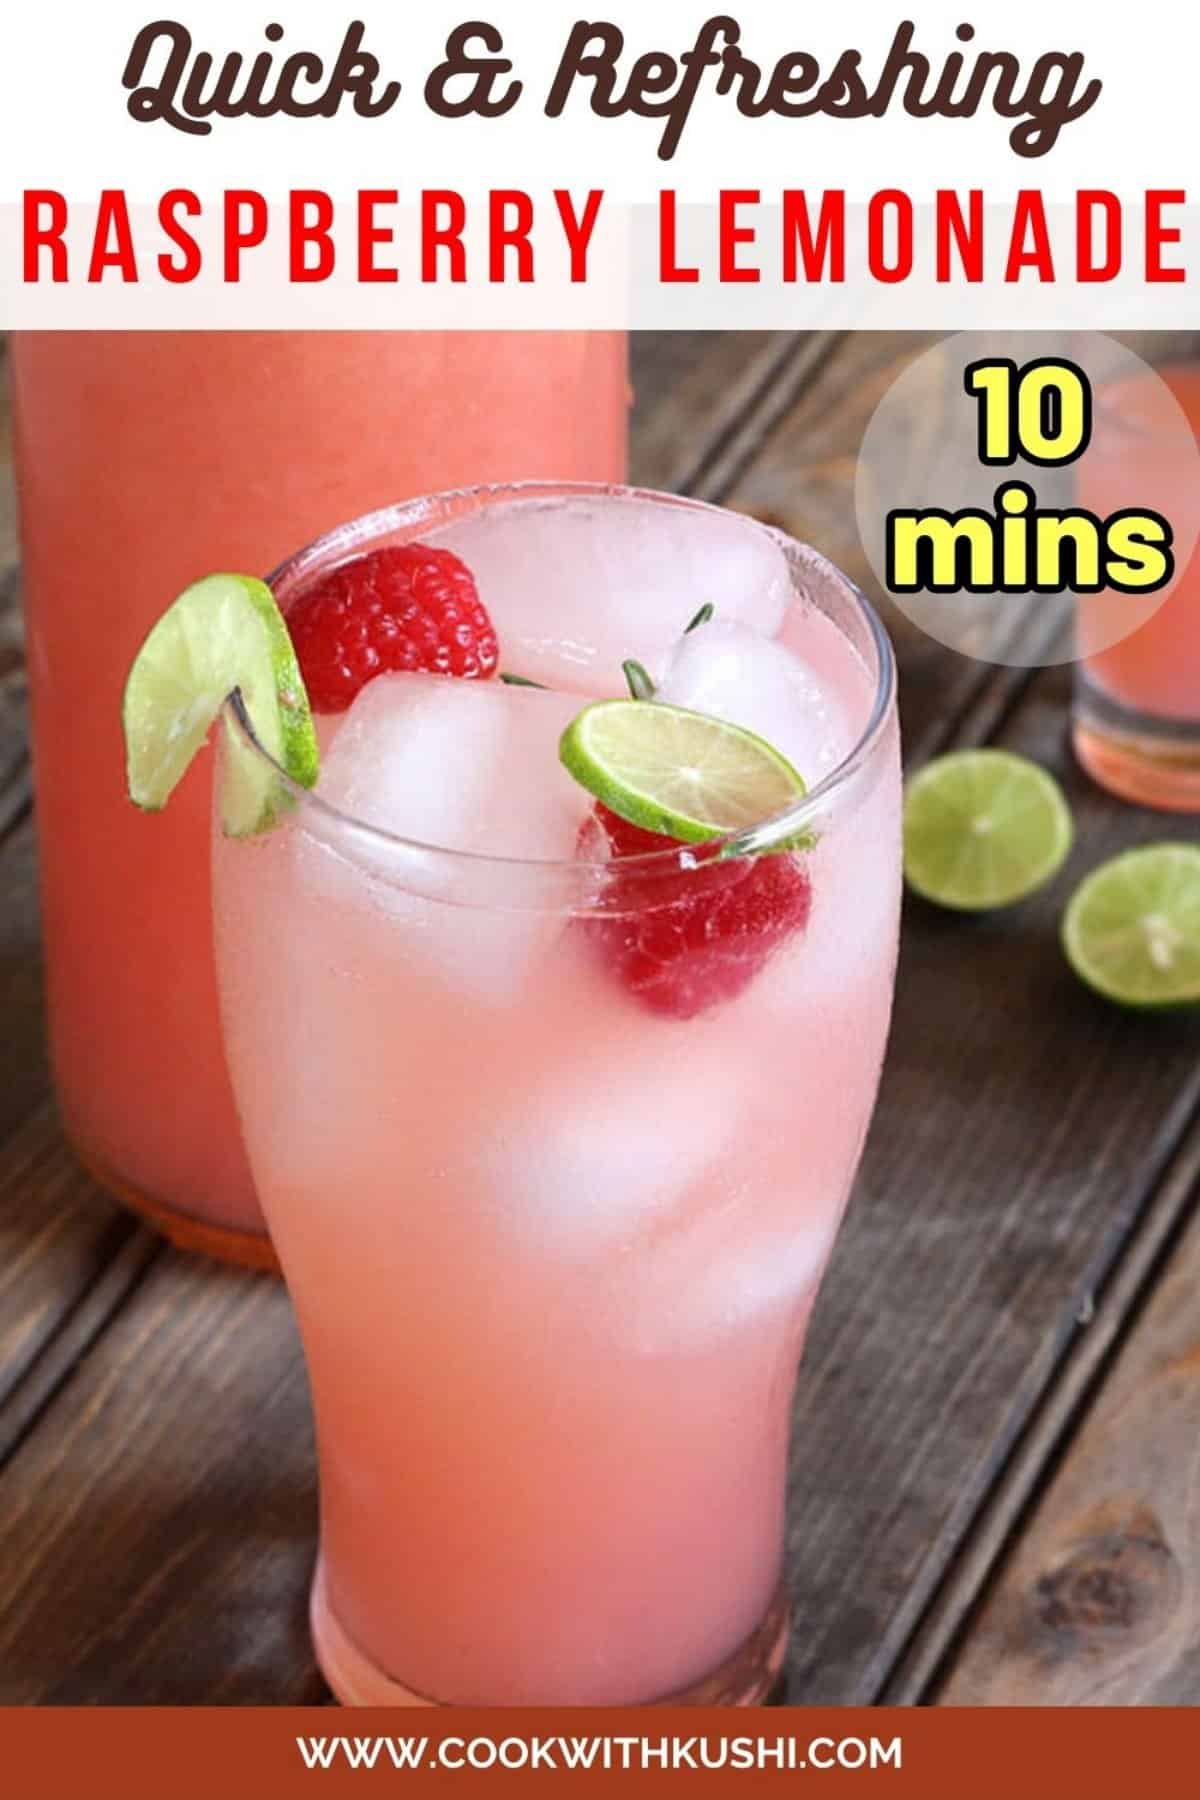 Best and Easy Raspberry Lemonade served with ice cubes, whole raspberries, and lemon slices in a tall glass.